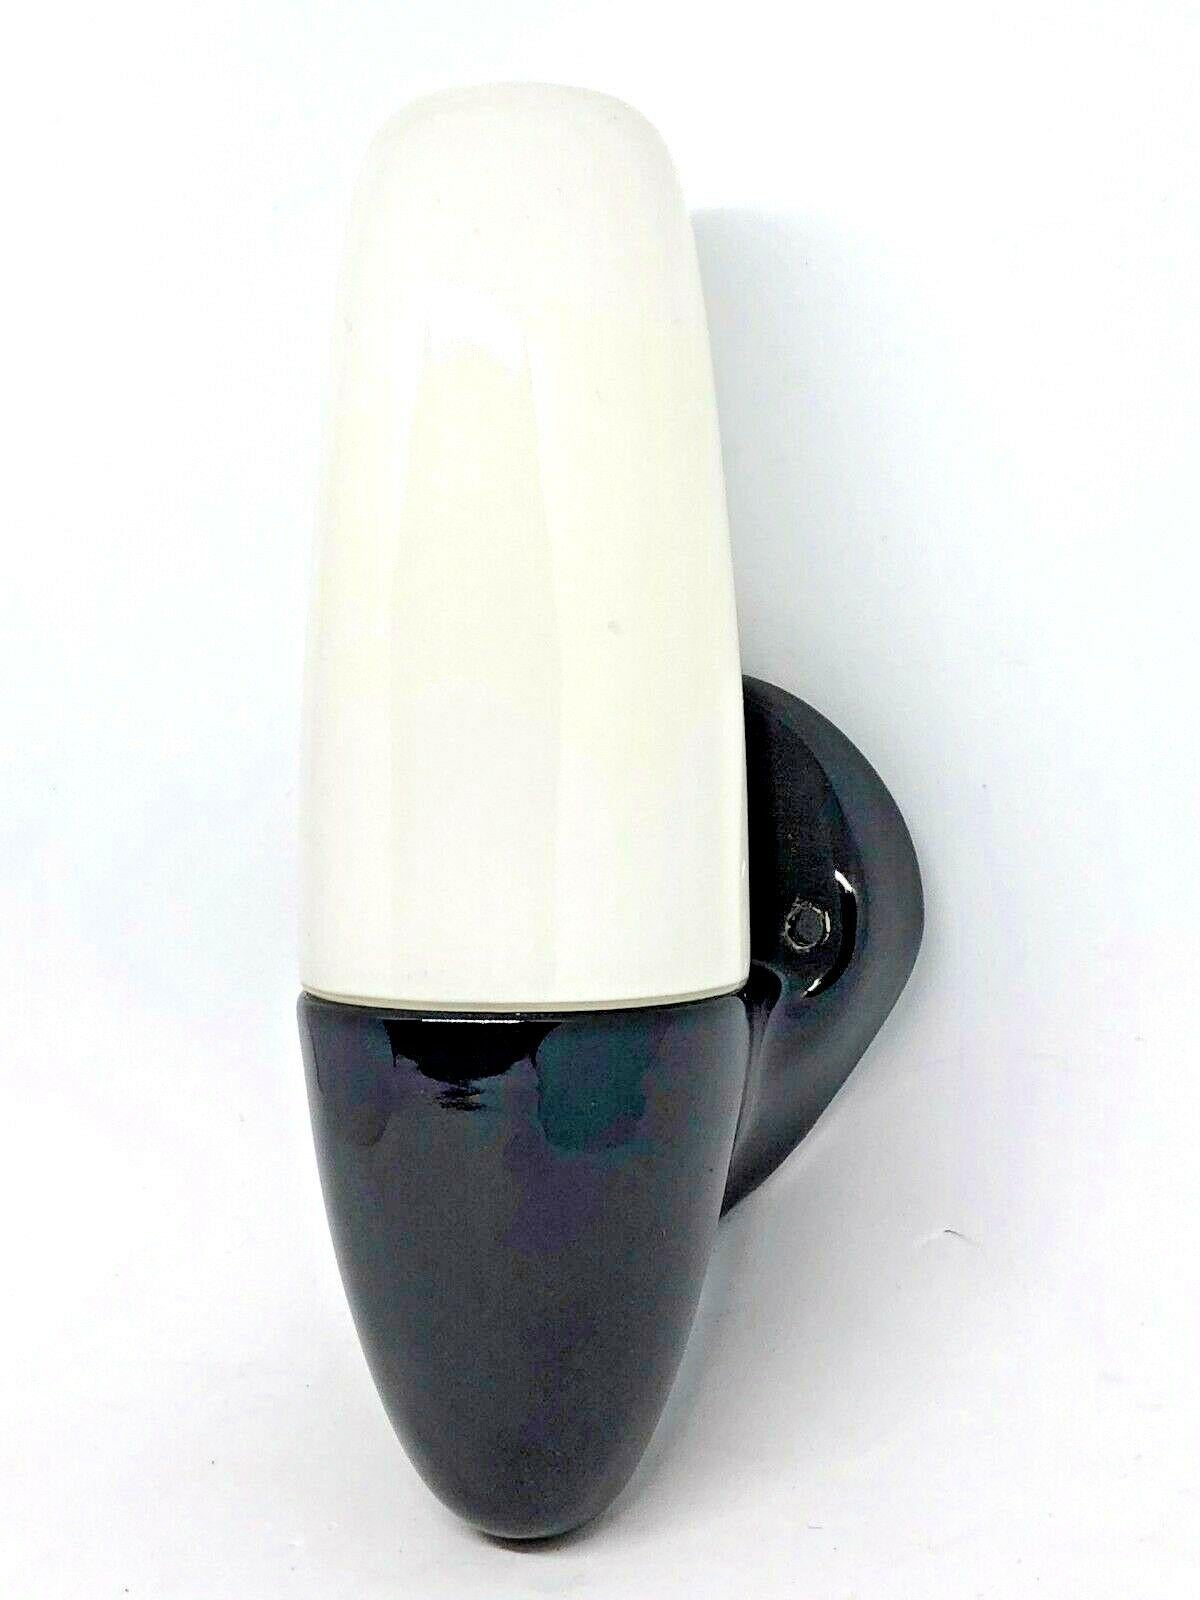 Bauhaus Wagenfeld Black and White Wall Sconce, Germany, 1950s For Sale 7